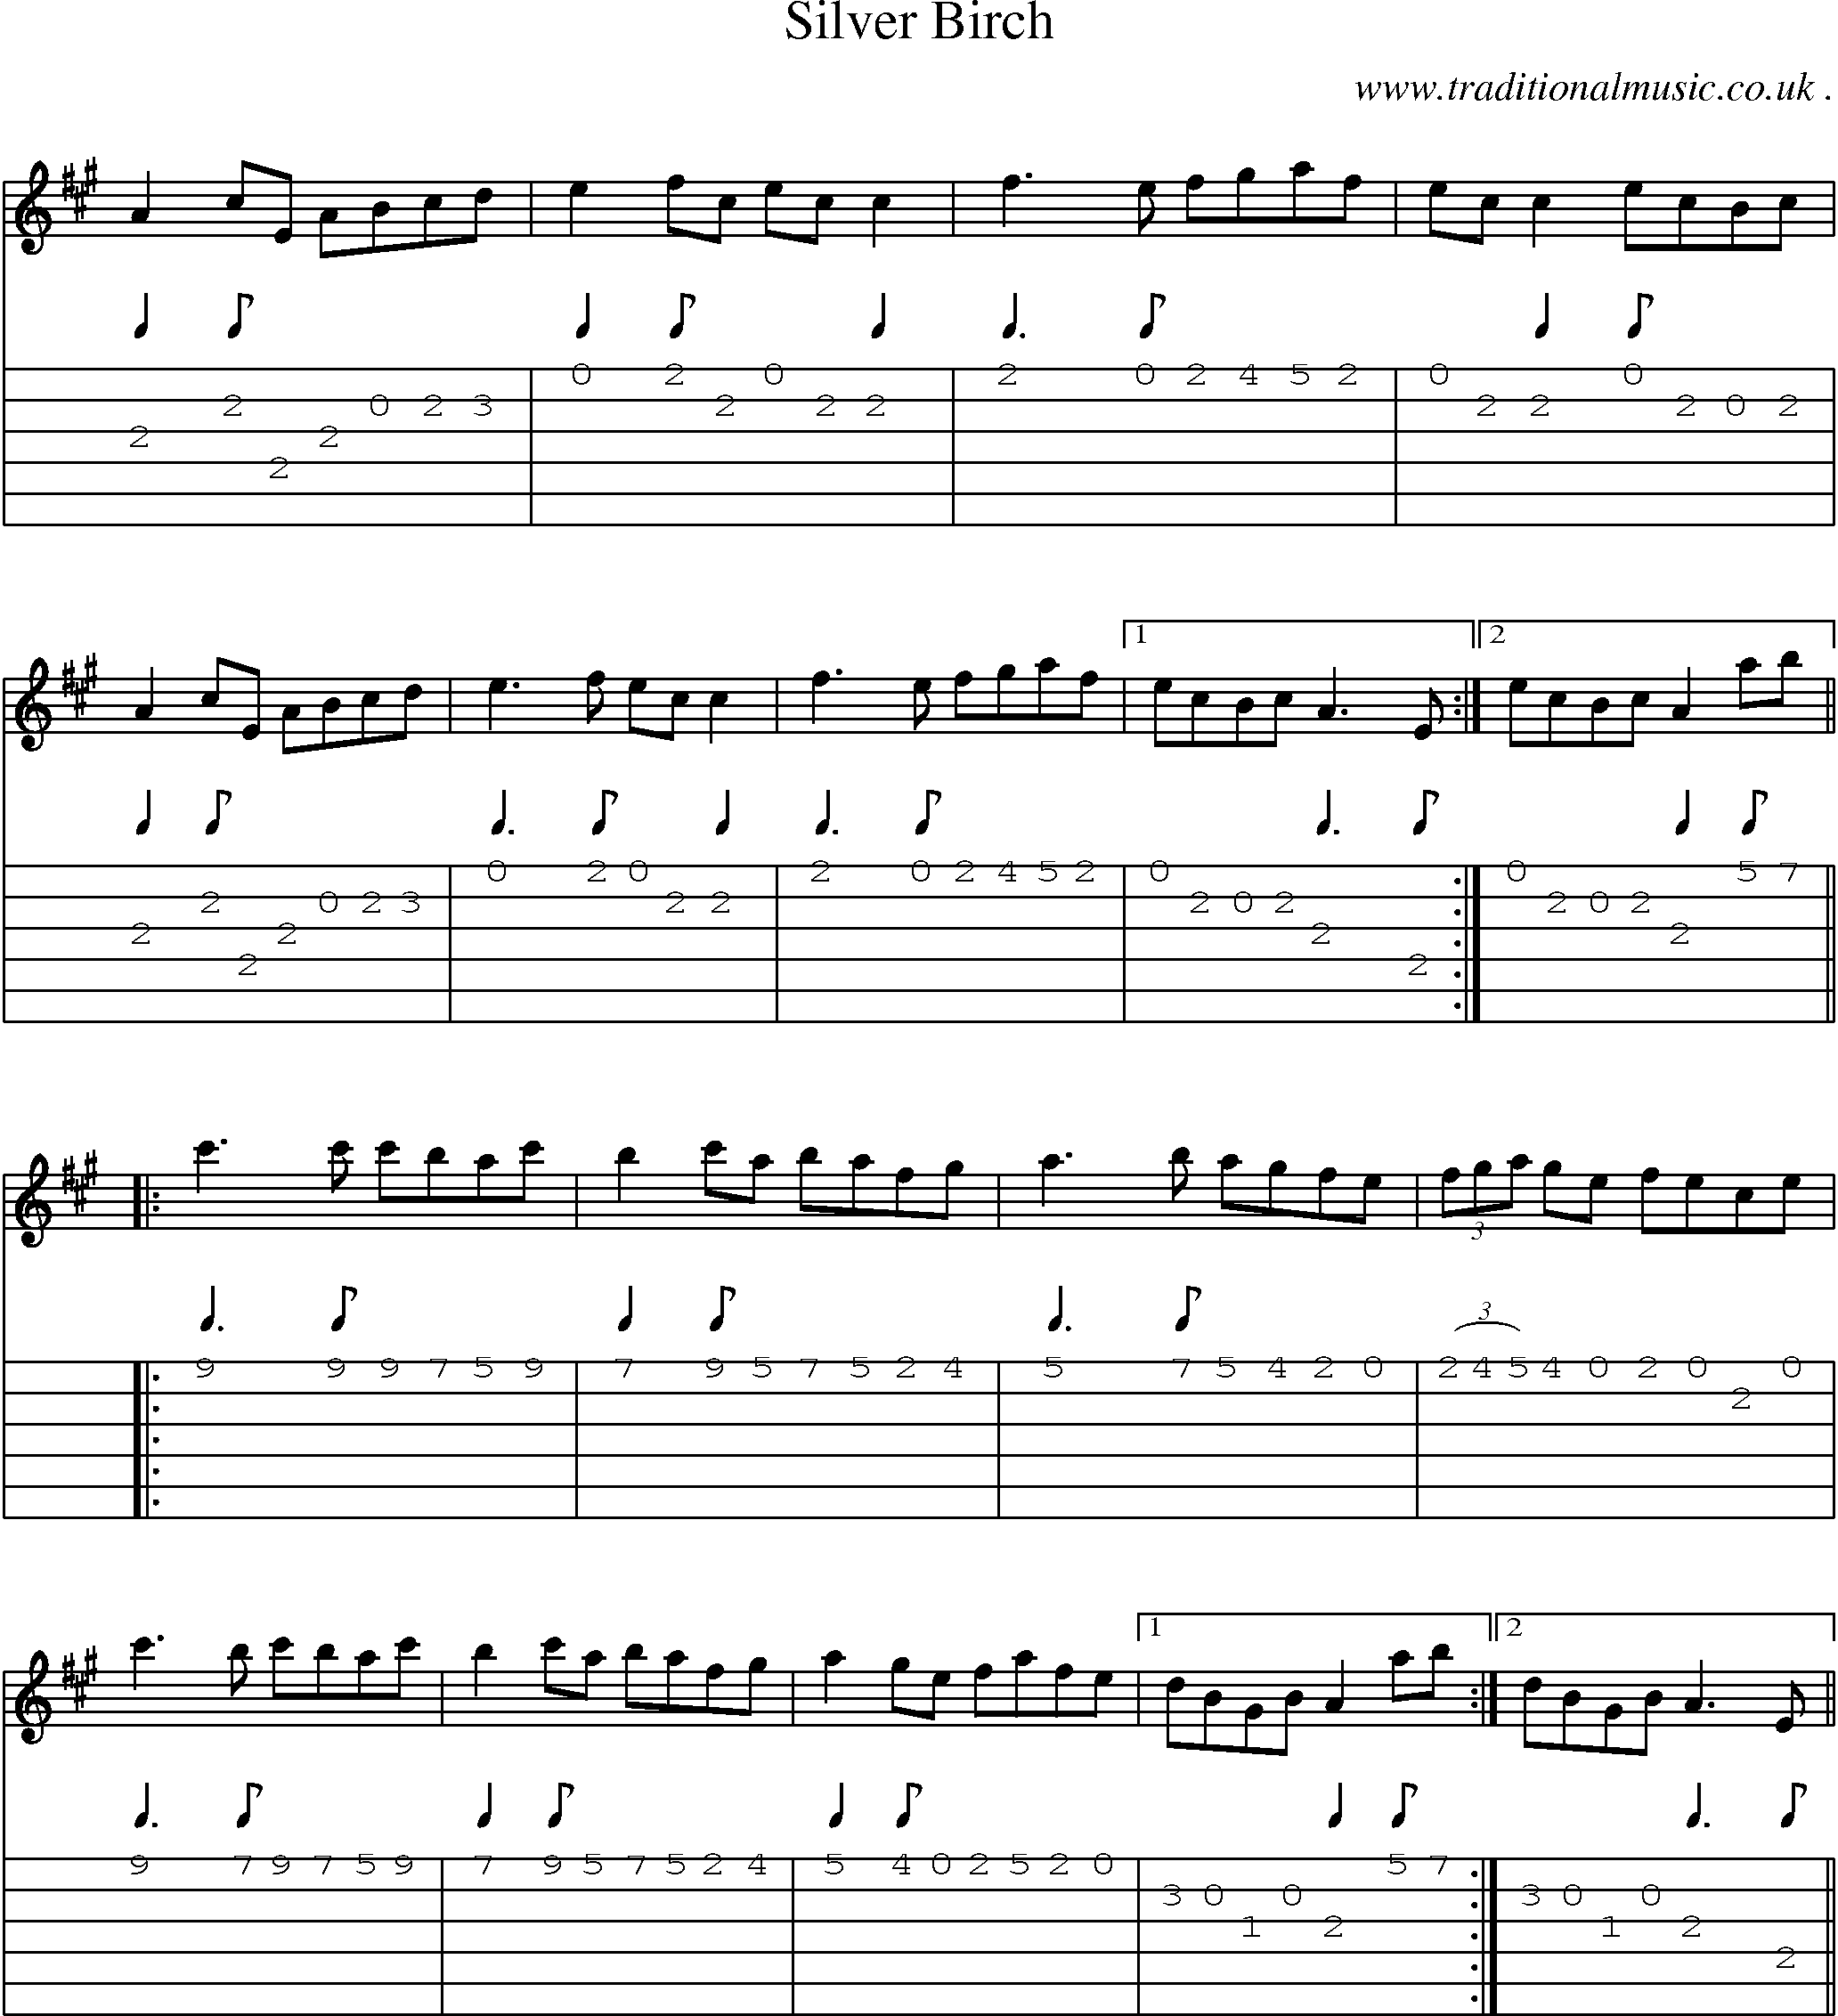 Sheet-Music and Guitar Tabs for Silver Birch